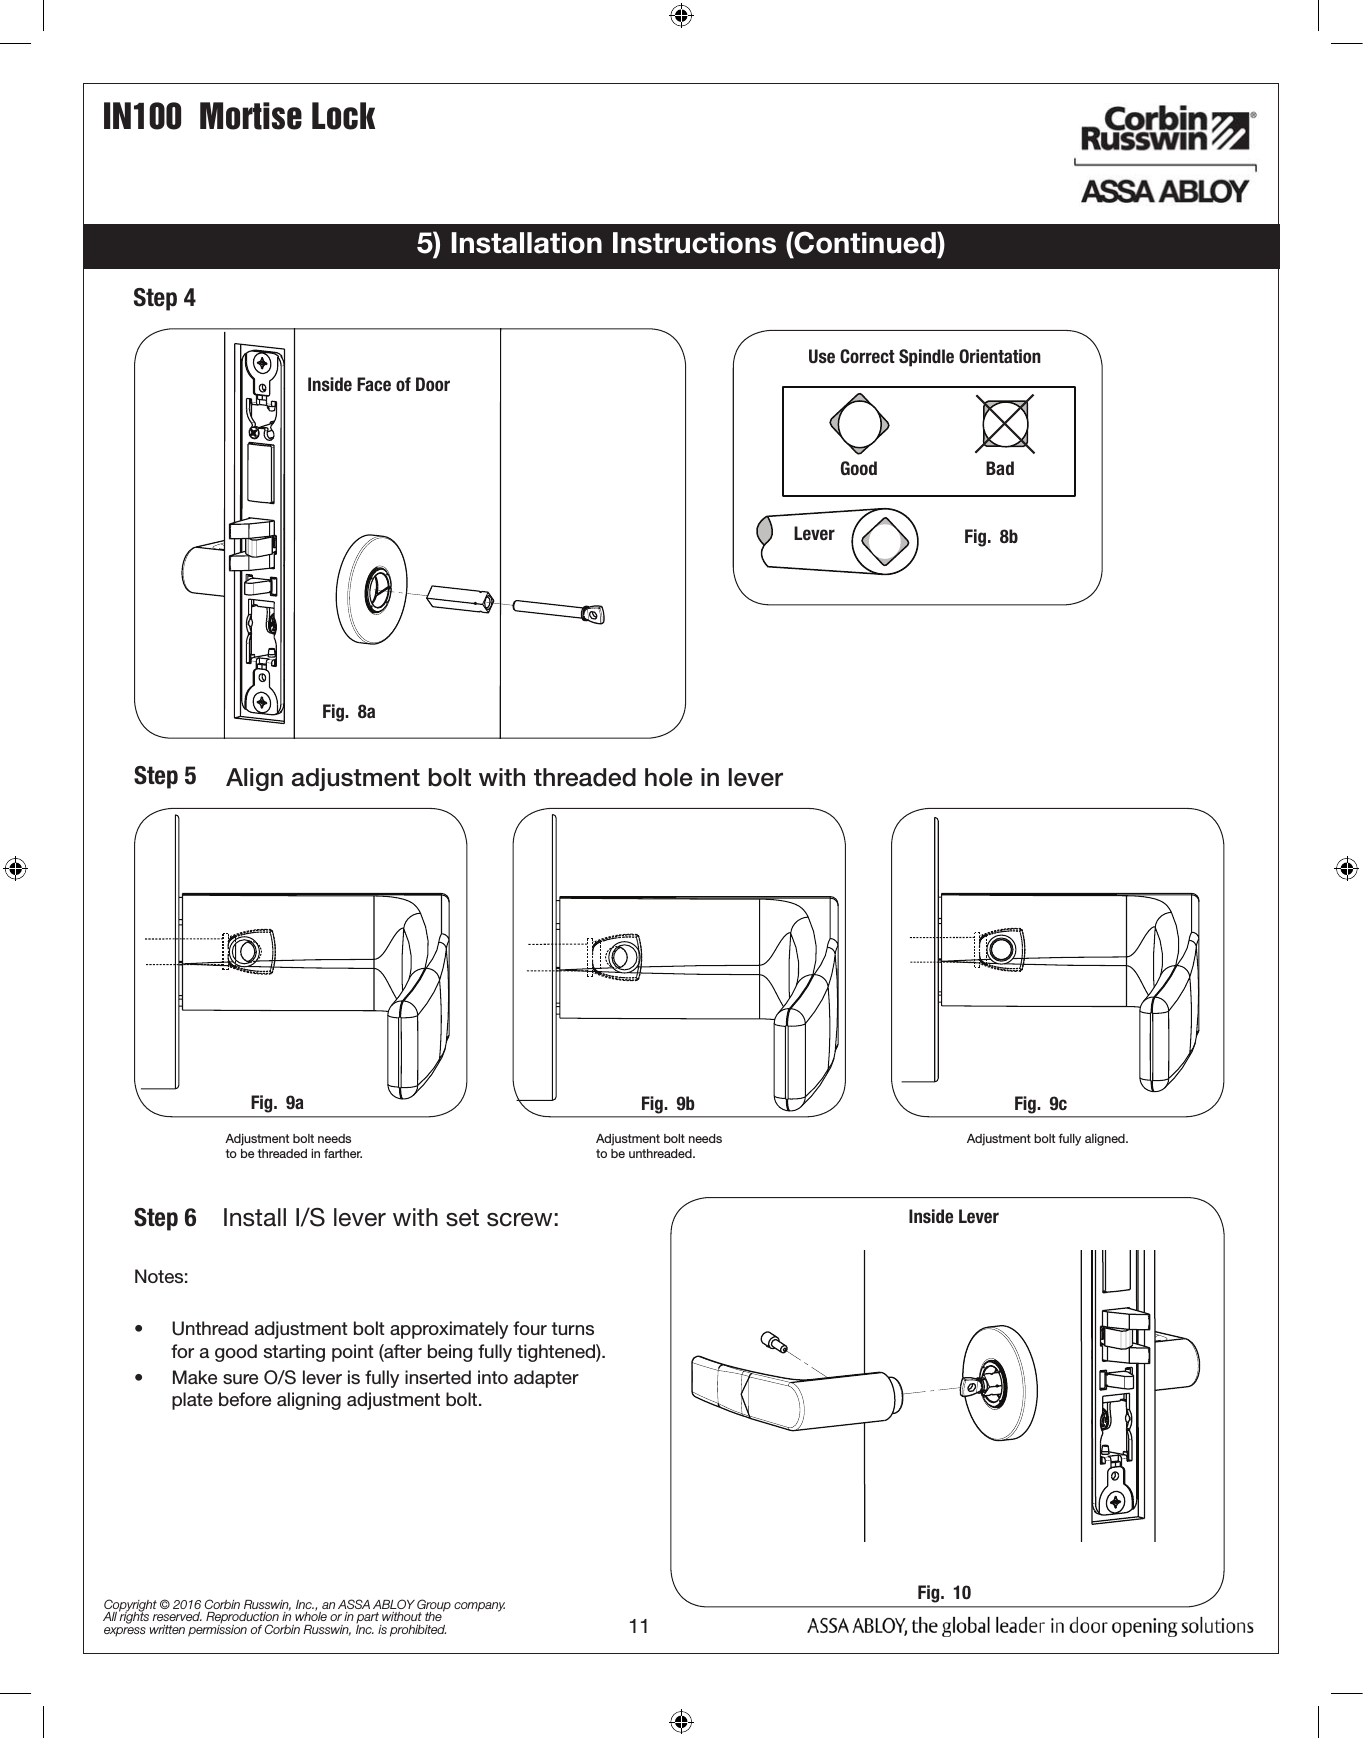 IN100  Mortise Lock11Copyright © 2016 Corbin Russwin, Inc., an ASSA ABLOY Group company. All rights reserved. Reproduction in whole or in part without the express written permission of Corbin Russwin, Inc. is prohibited.Fig.  8aInside Face of DoorStep 4 Step 5  Align adjustment bolt with threaded hole in leverAdjustment bolt needsto be threaded in farther.Adjustment bolt needsto be unthreaded.Adjustment bolt fully aligned. Notes:•  Unthread adjustment bolt approximately four turns  for a good starting point (after being fully tightened).•  Make sure O/S lever is fully inserted into adapter plate before aligning adjustment bolt.STANDARD MUSÉOkƒ„ƒ·Use Correct Spindle OrientationGood                                                Bad                           Lever           Fig.  8b5) Installation Instructions (Continued)Inside LeverFig.  9a Fig.  9b Fig.  9cFig.  10Step 6   Install I/S lever with set screw: